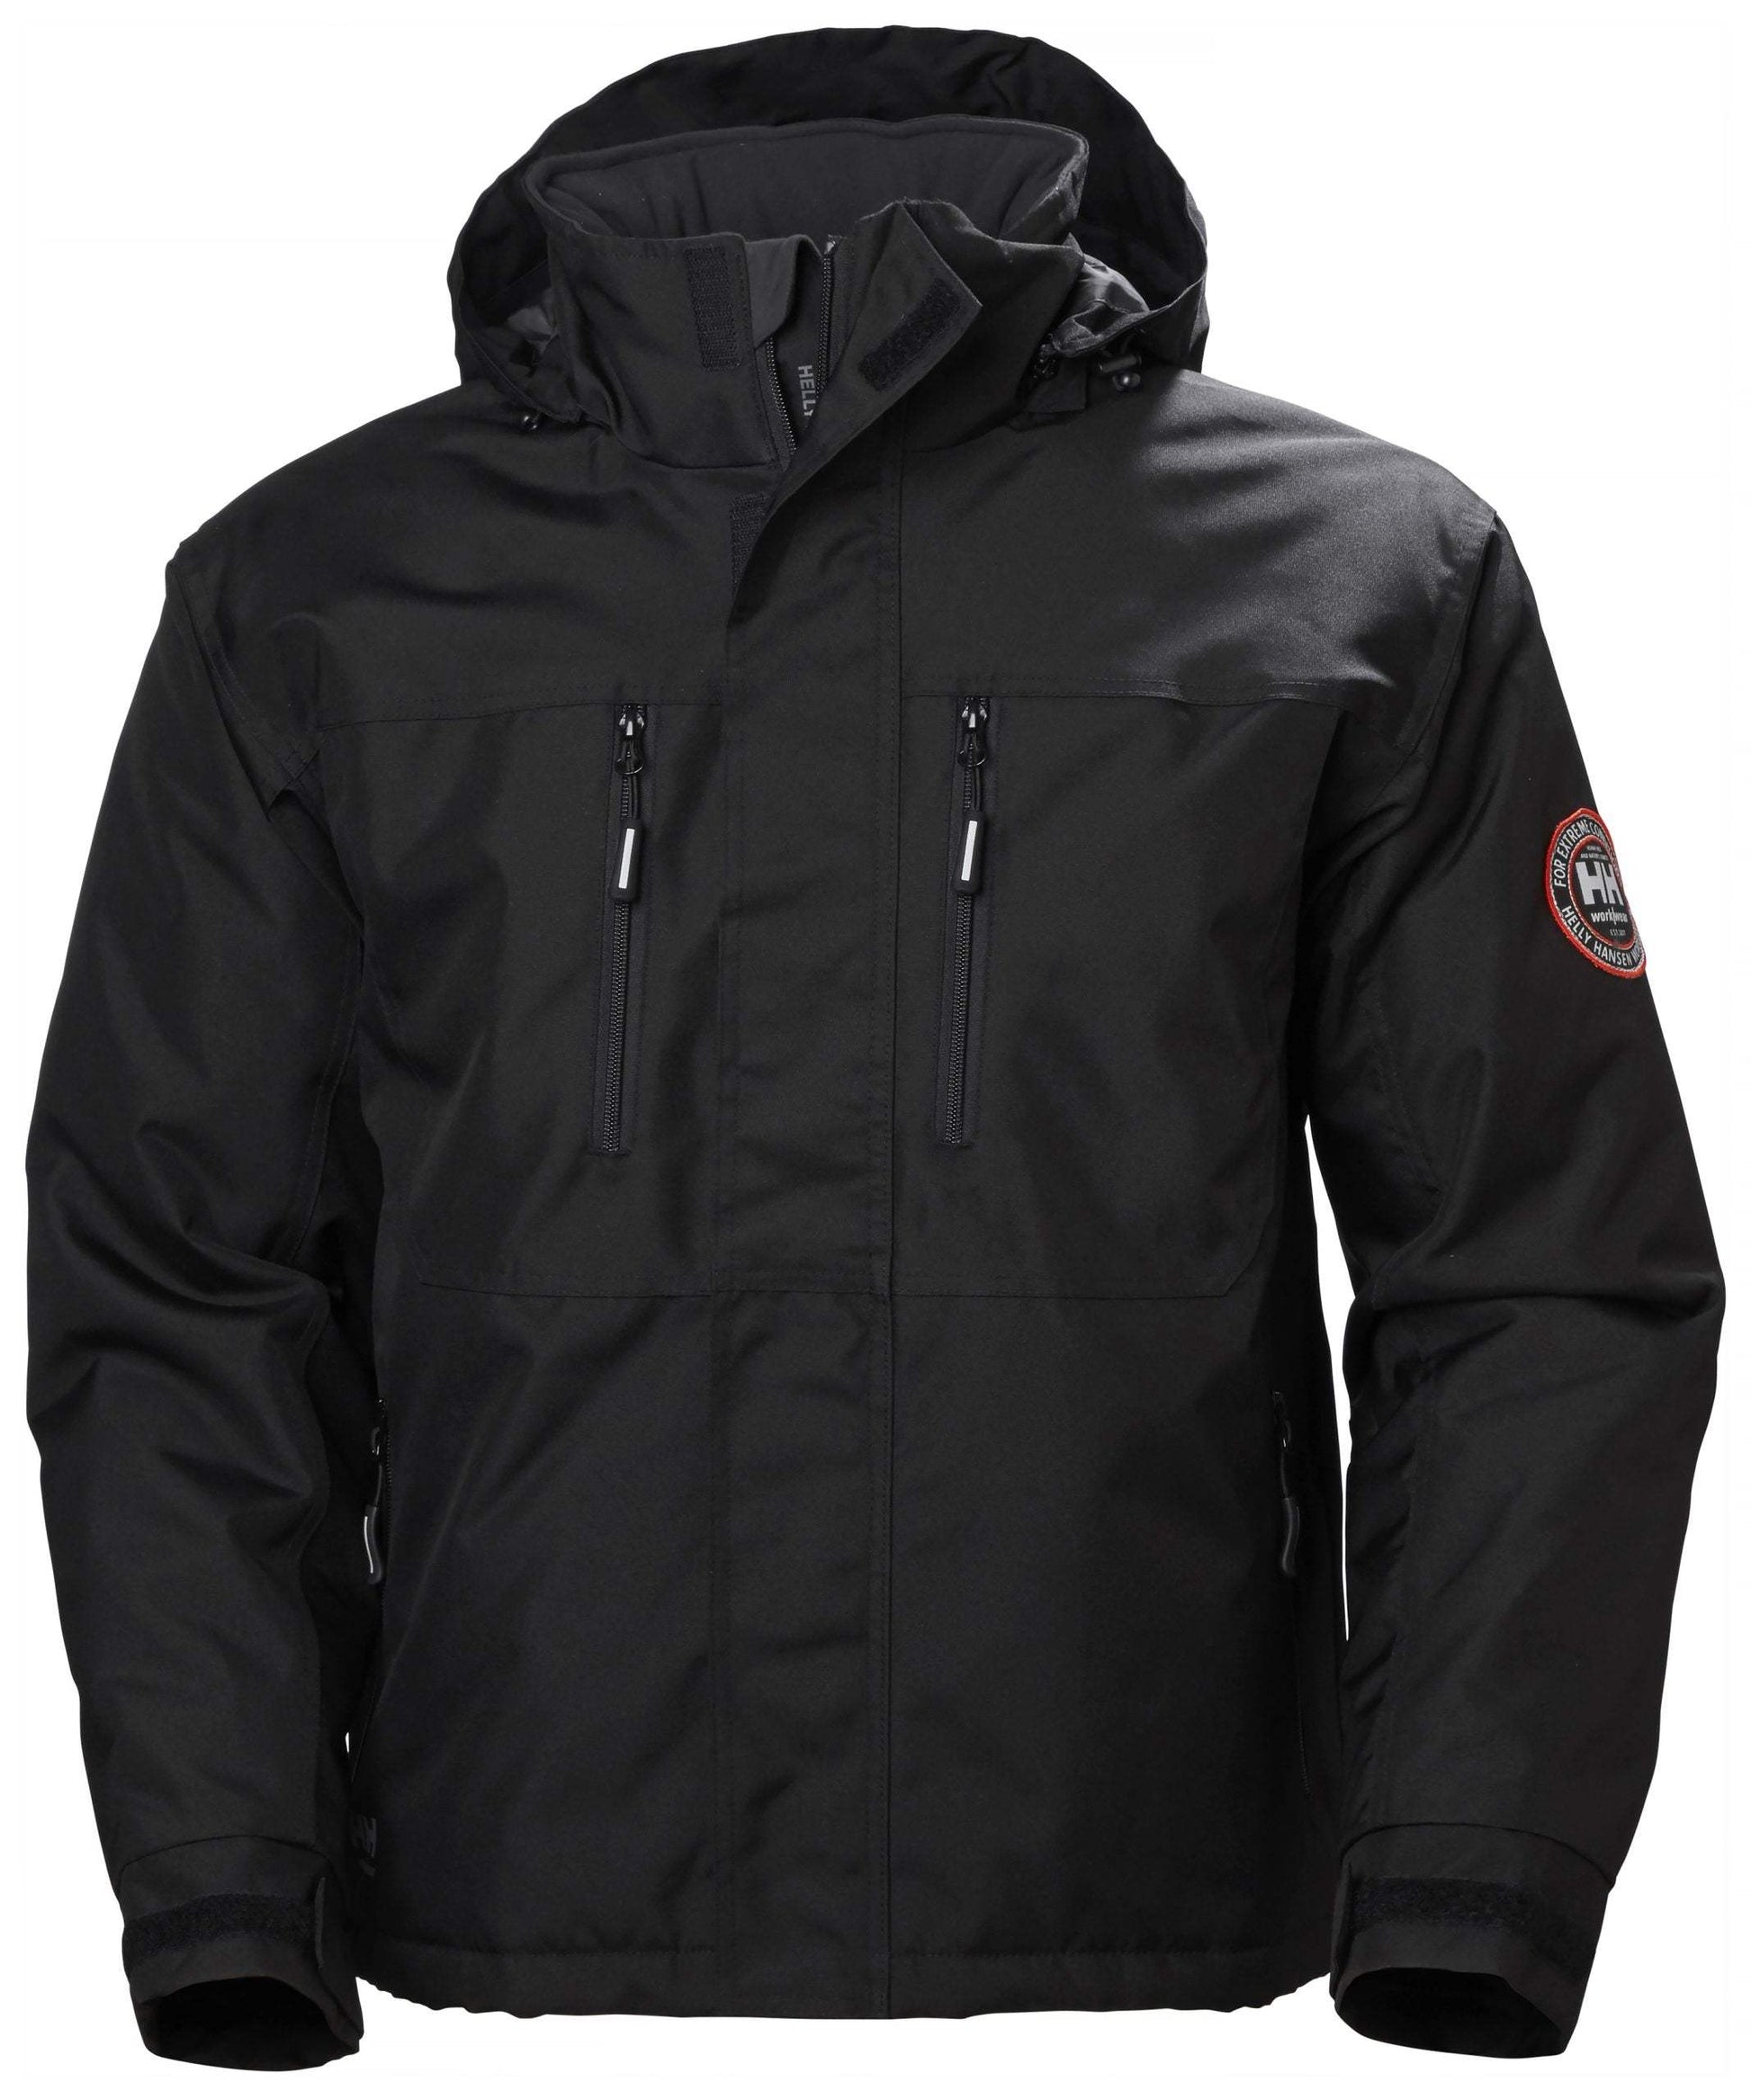 Men’s Berg Jacket by Helly Hansen - The Luxury Promotional Gifts Company Limited